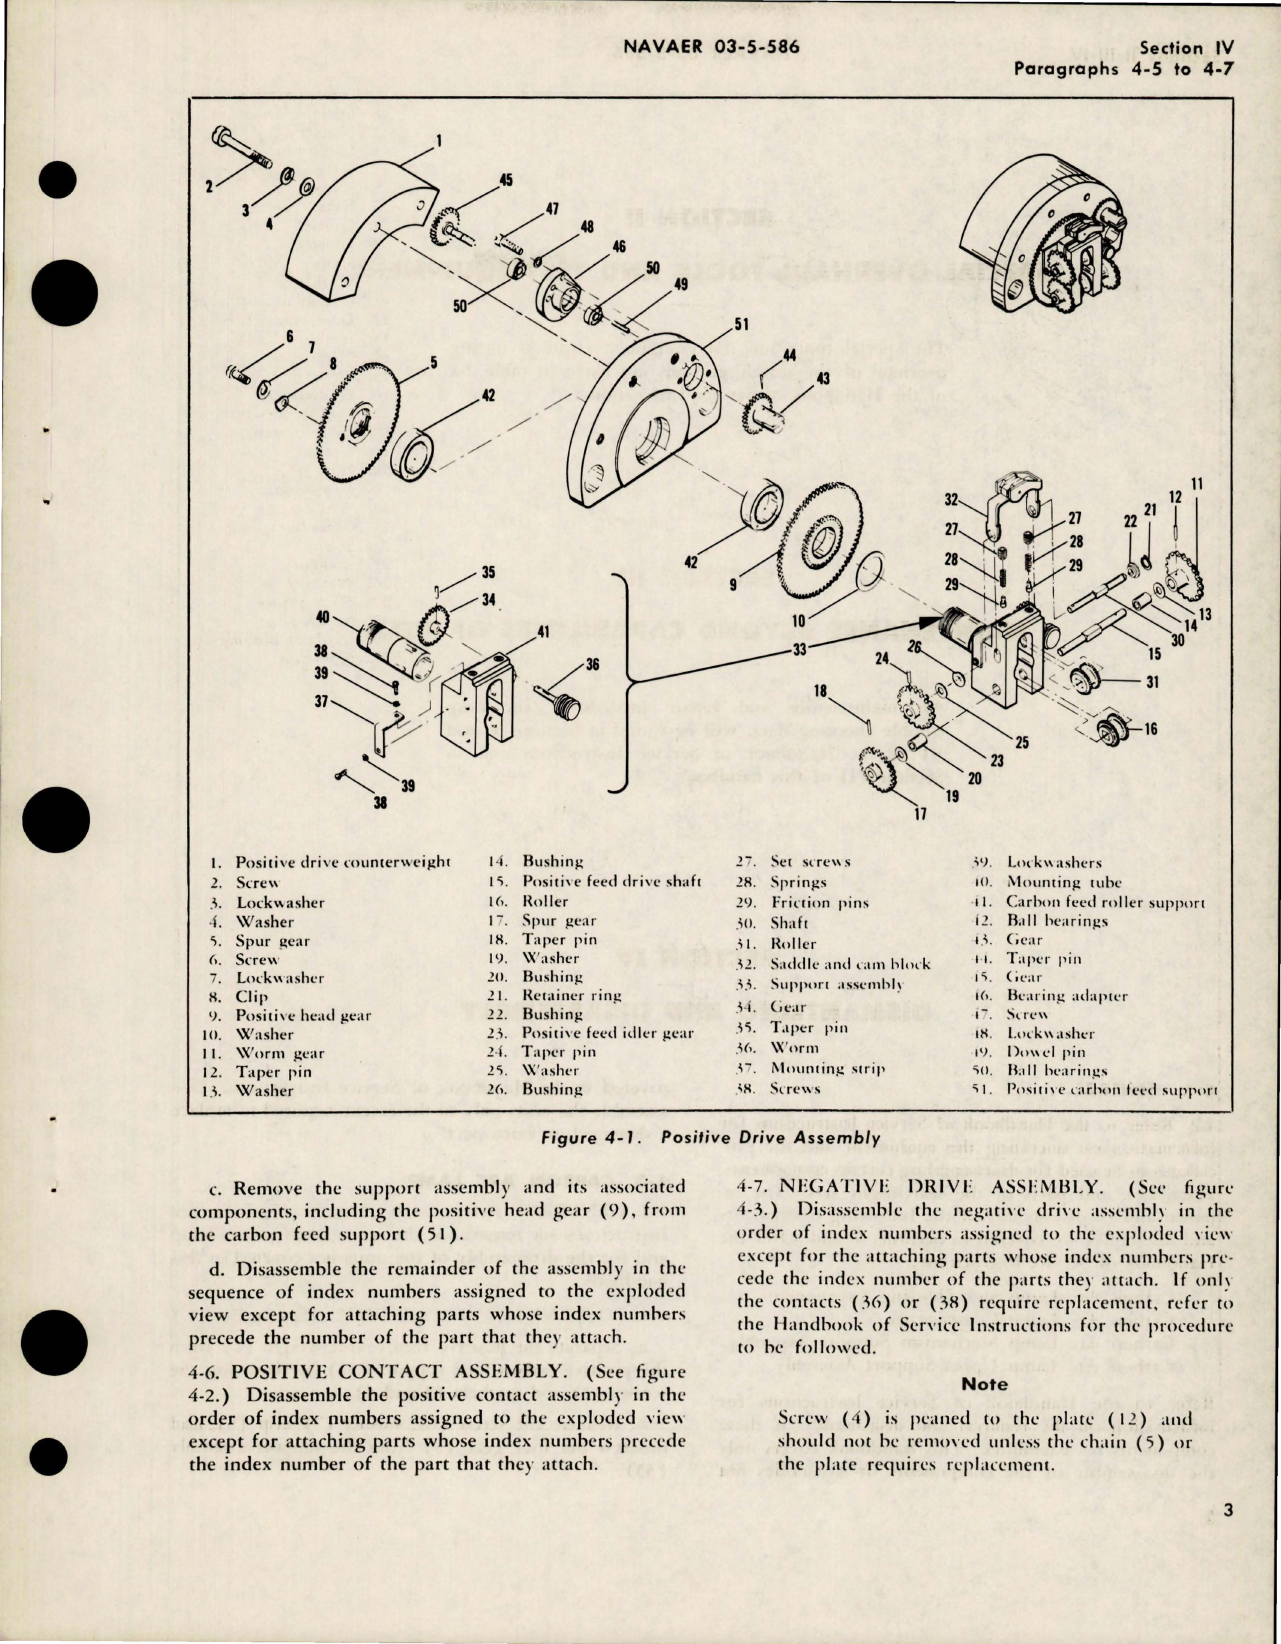 Sample page 9 from AirCorps Library document: Overhaul Instructions for Aircraft Searchlight Sets - AN-AVQ-2 and AN-AVQ-2A